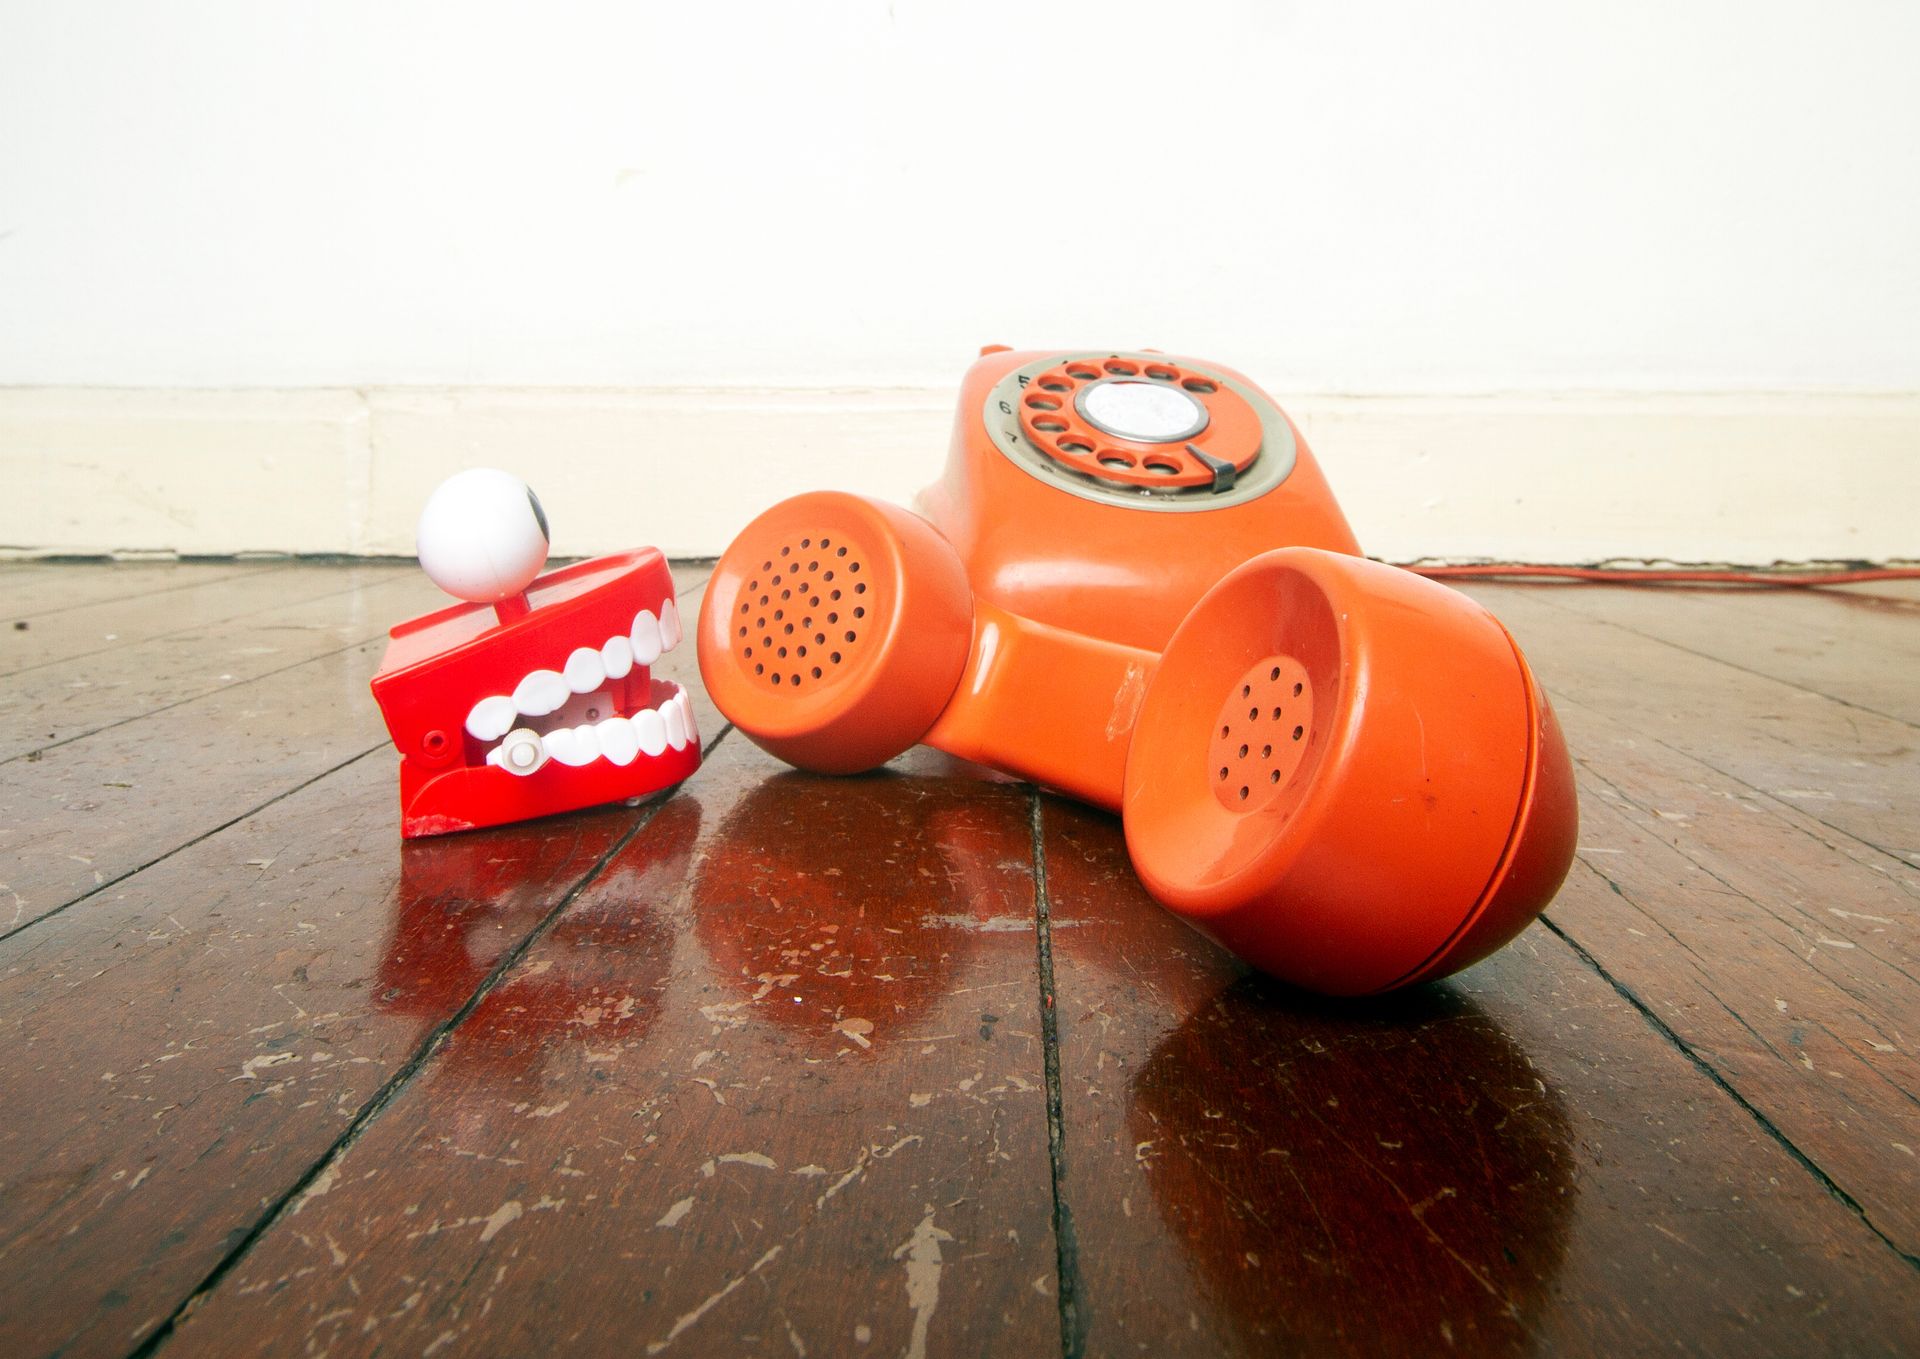 Robo and spam call image concept with a chattering teeth toy talking into a phone receiver.